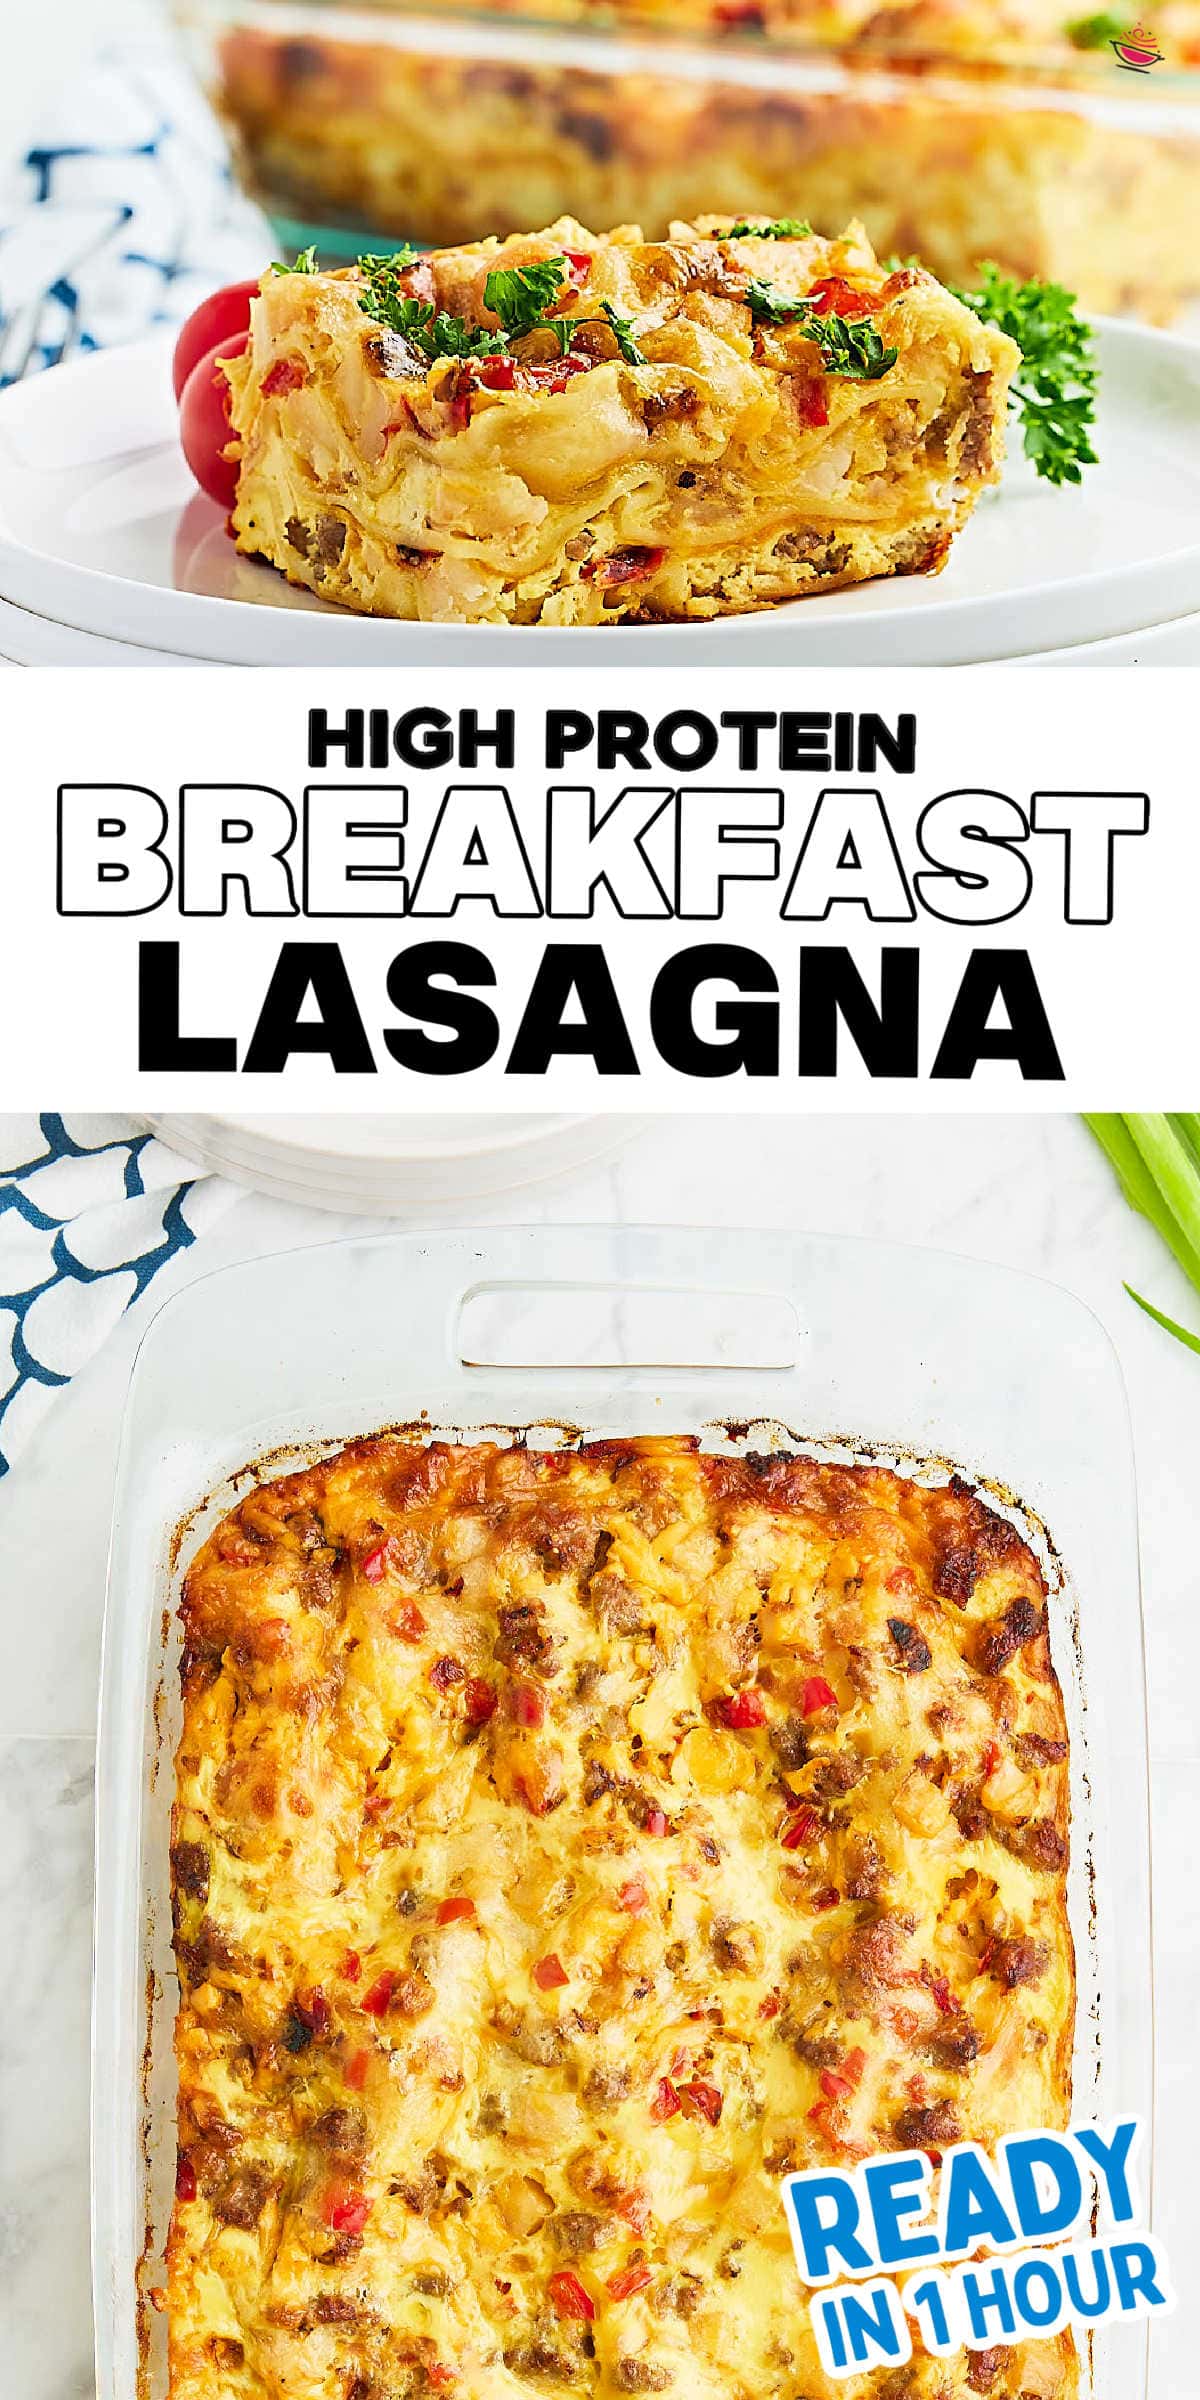 Swap your usual breakfast with this yummy Breakfast Lasagna! It's a fun and tasty twist on your morning meal, packed with your favorite breakfast sausage, veggies, and lots of cheese, perfect for serving a crowd. #cheerfulcook #breafkastlasagna #breakfastideas #lasagna #easyrecipes #familymeals #comfortfood via @cheerfulcook